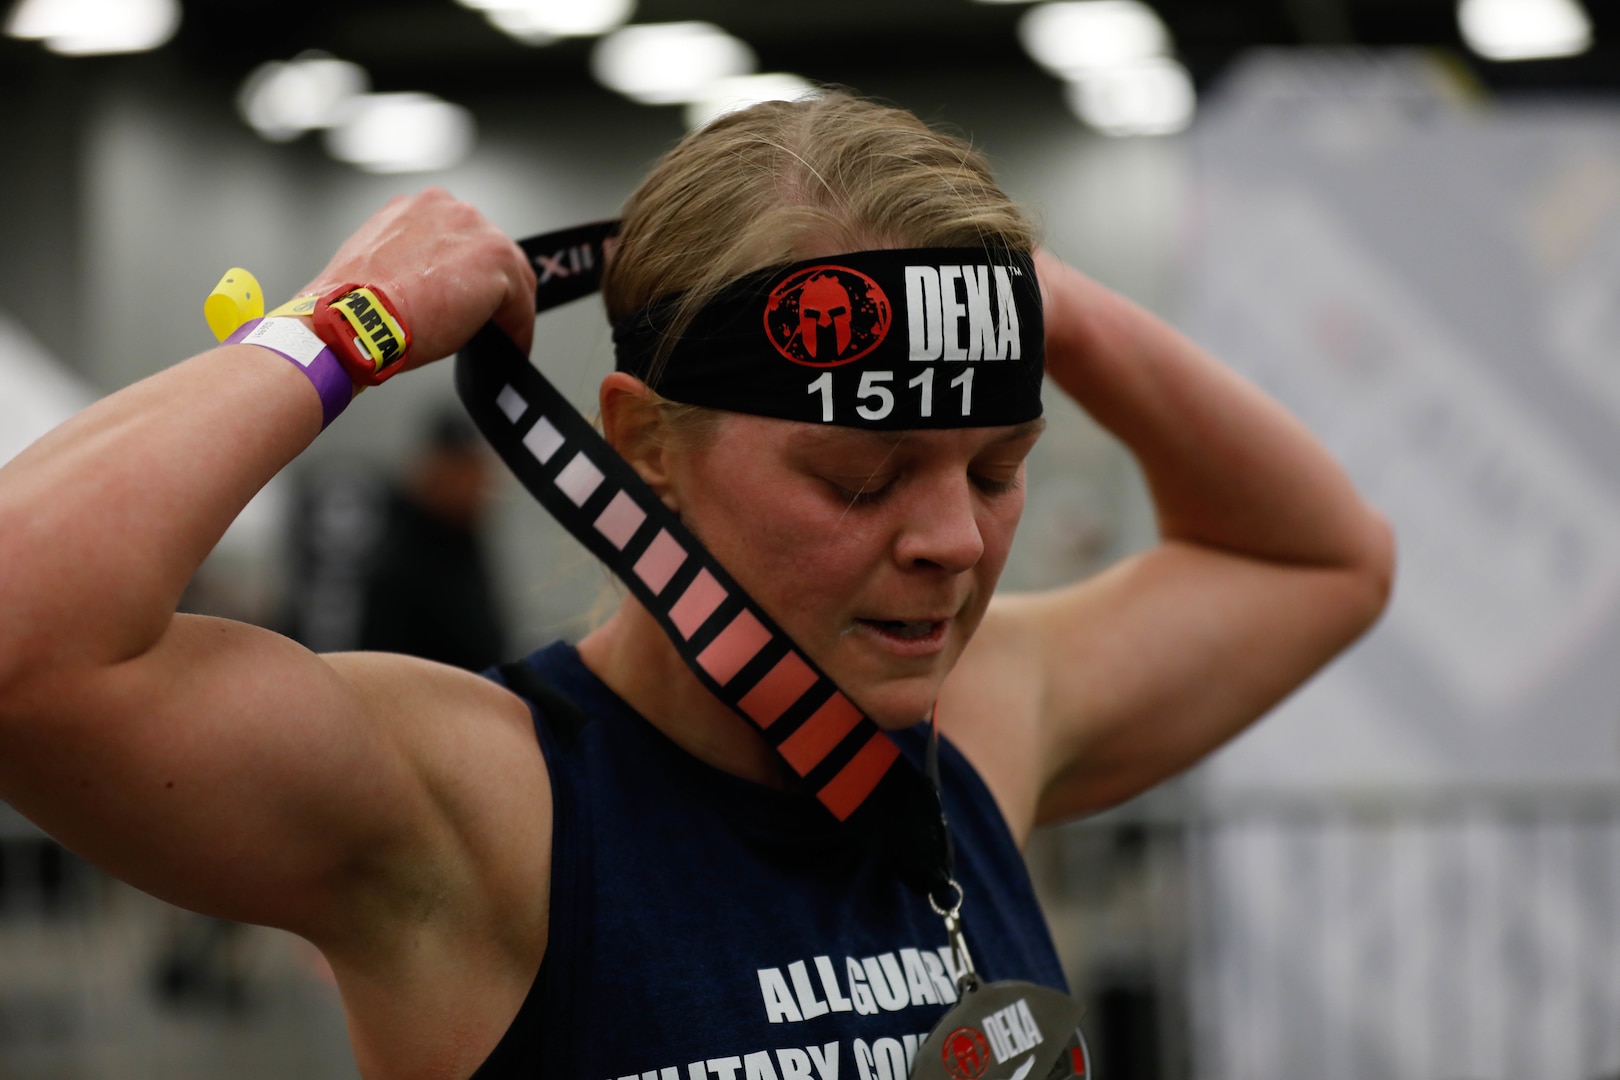 Army and Air Guard members compete in fitness contest > National